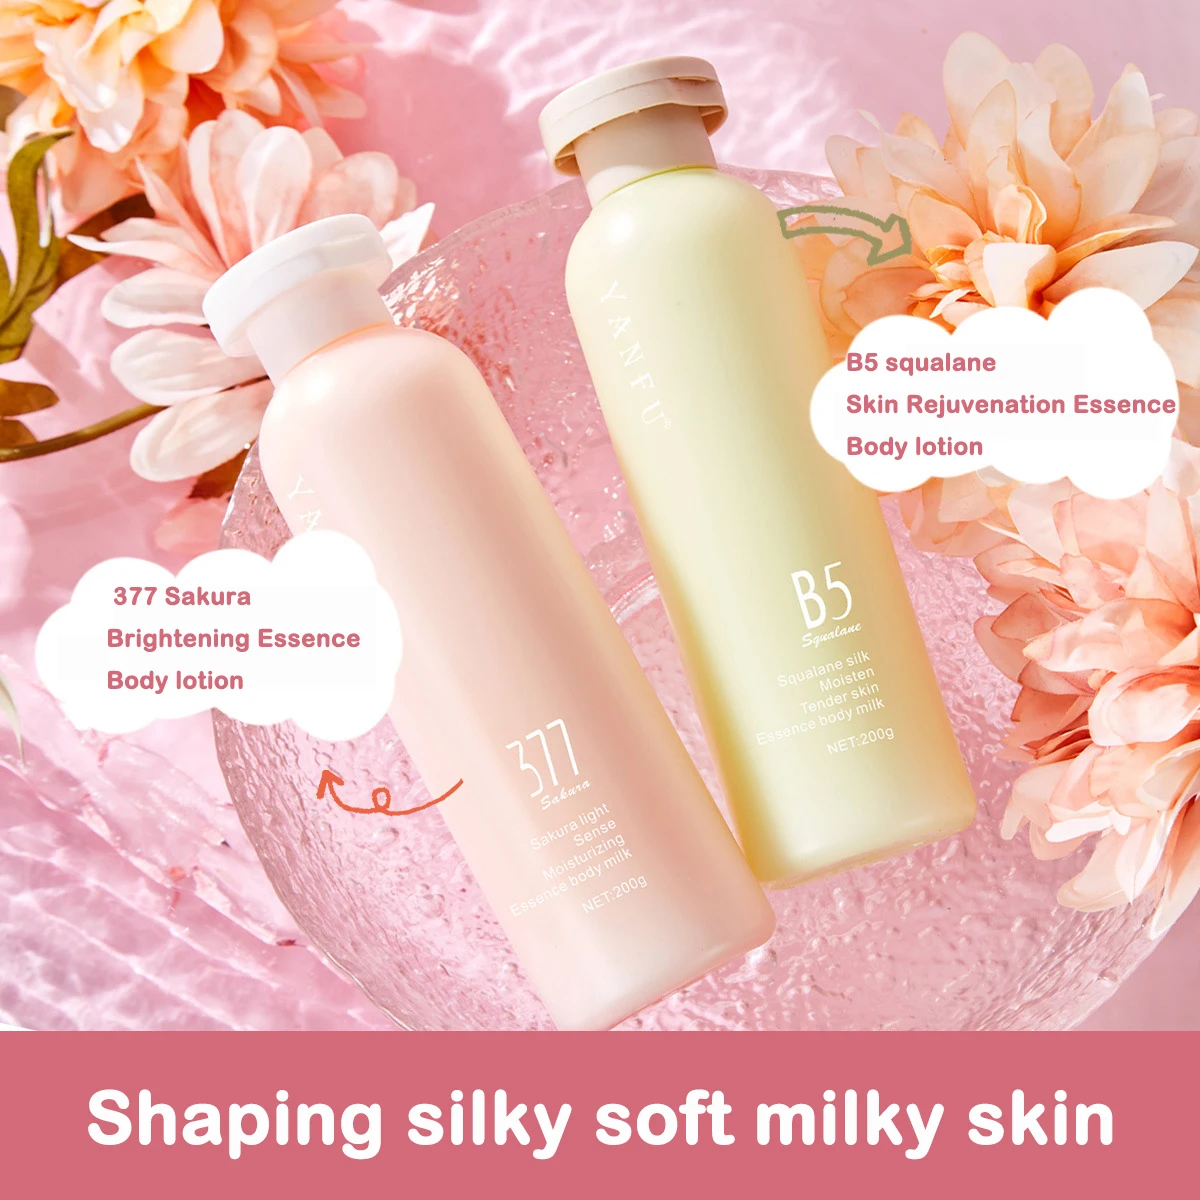 

200ml Squalane B5 Fragrance Body Lotion Moisturizing Lasting Fragrance Moisturizing Sakura Body Lotion Skin care products